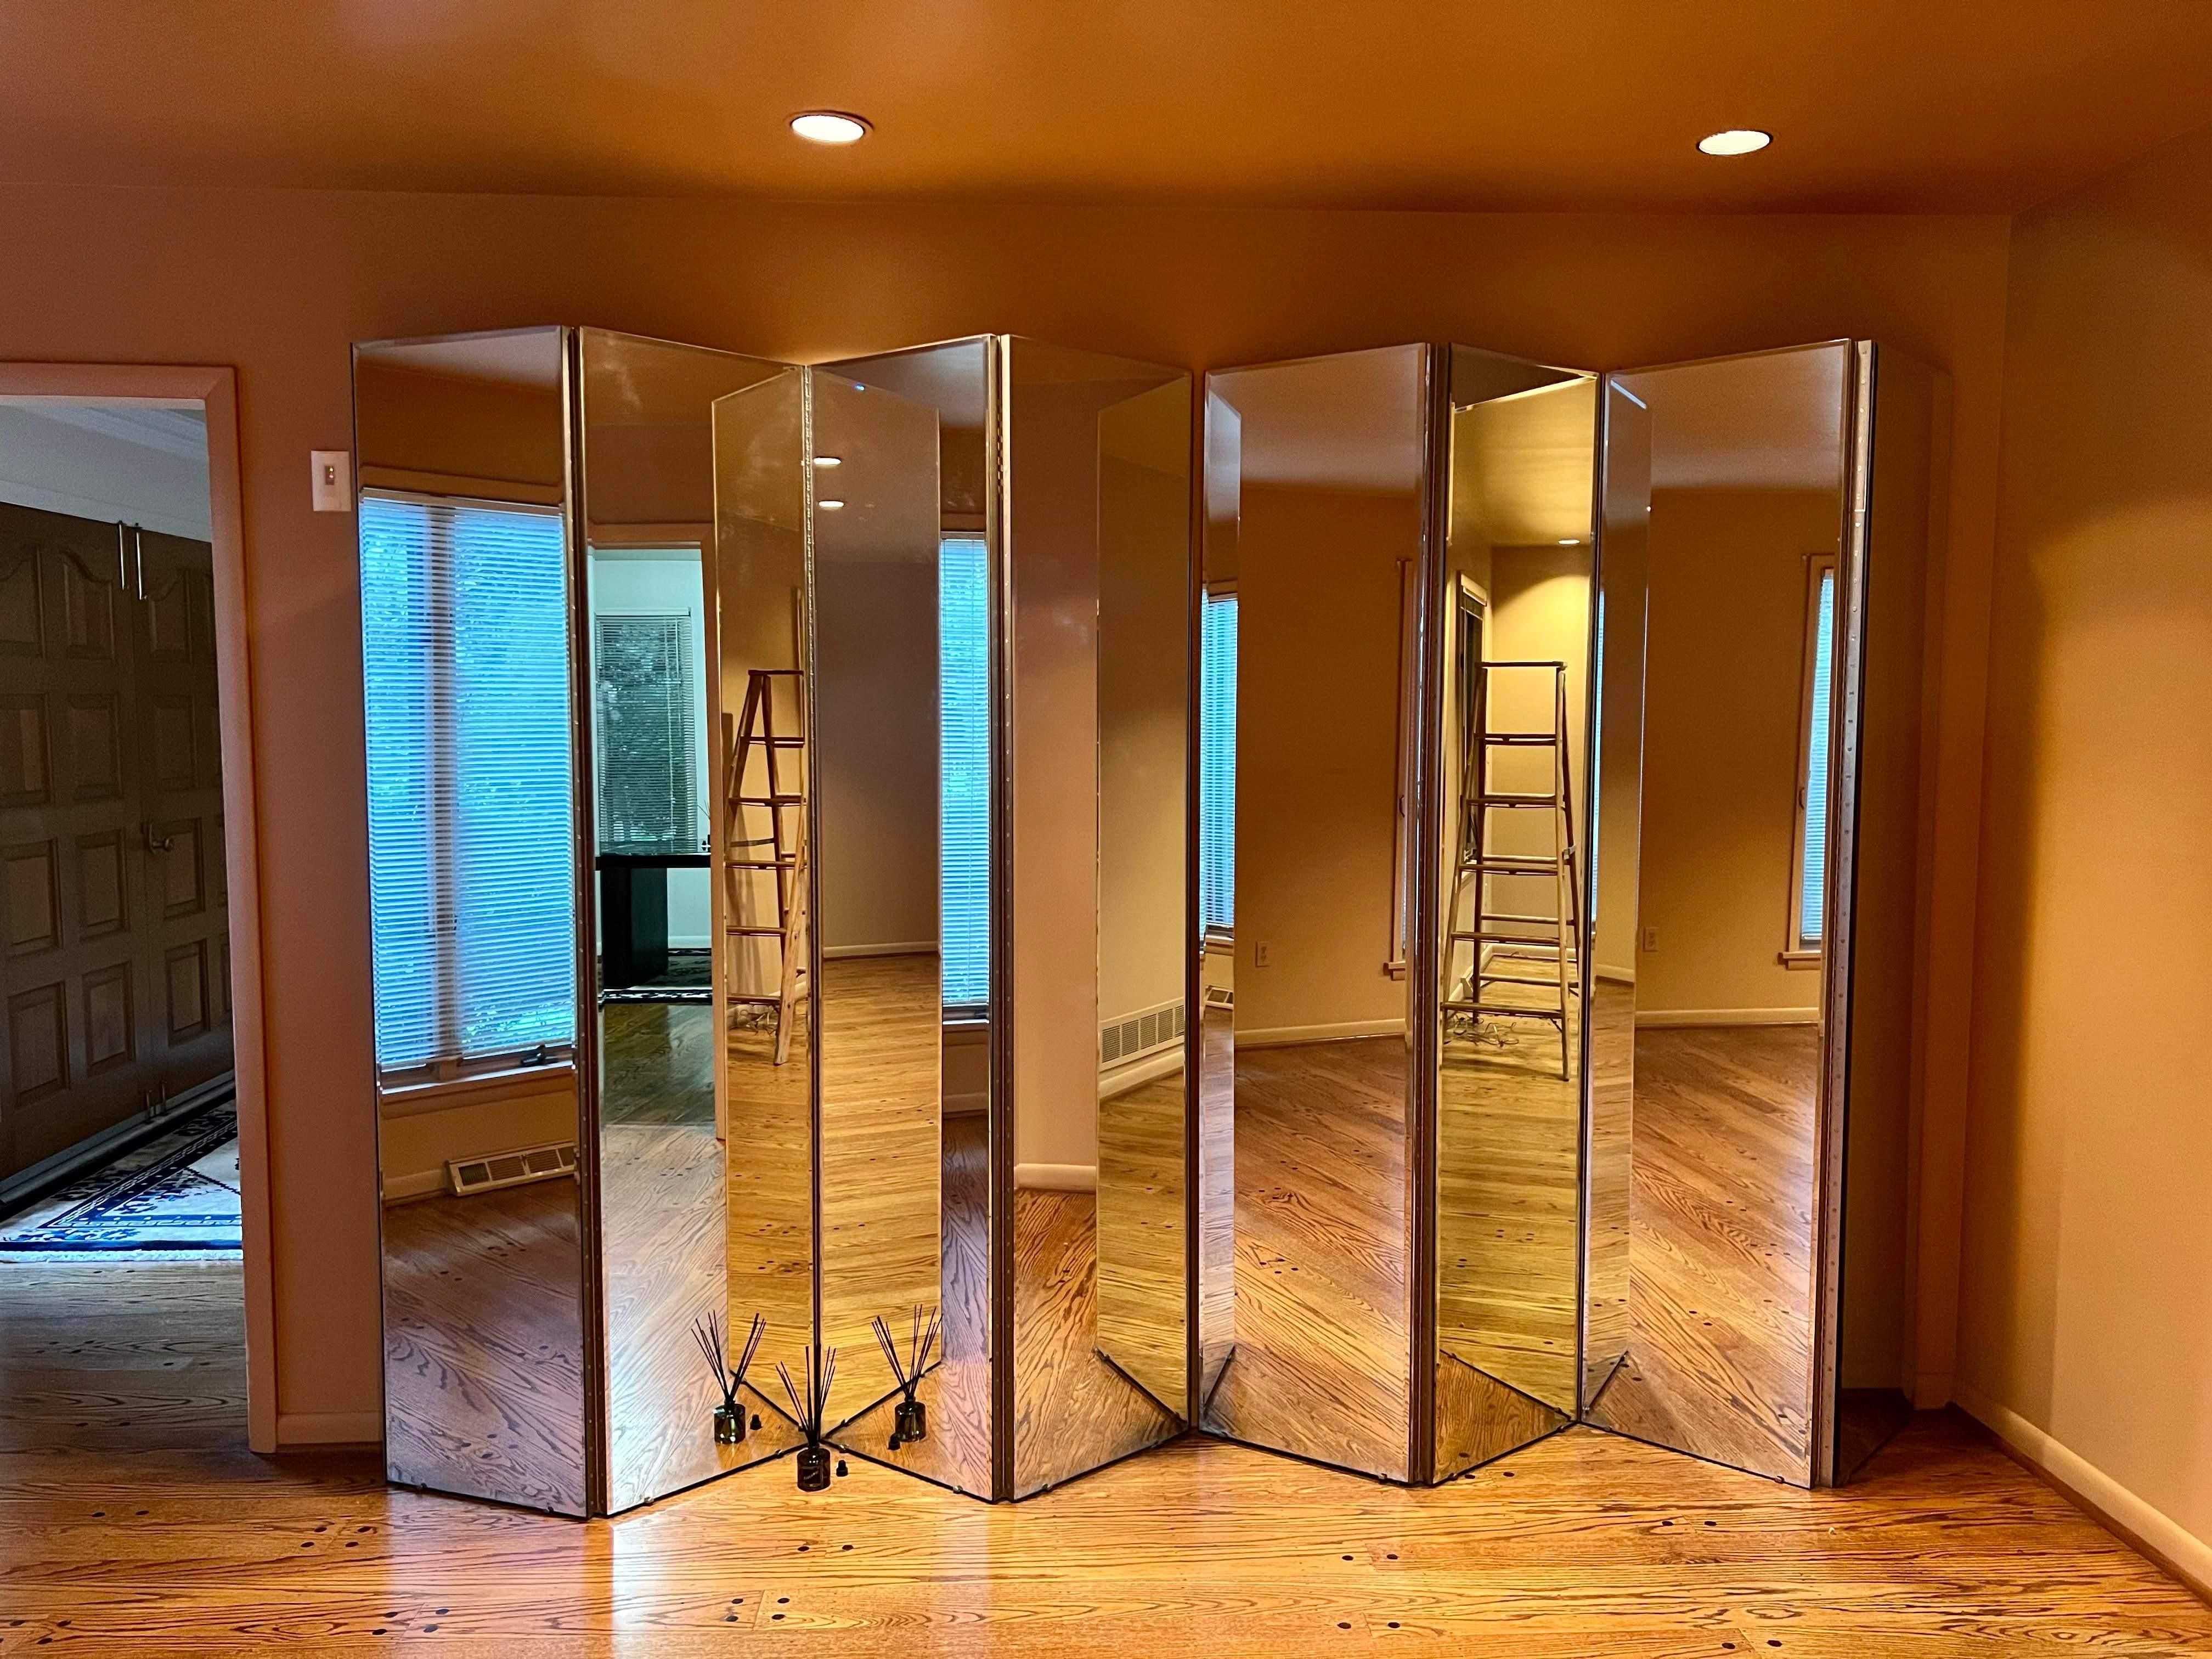 1980s hinged mirror room dividers this is 2 sets of 4 panels each these are in perfect condition no chips or breaks they were never moved til we acquired them each panel is 18�” wide